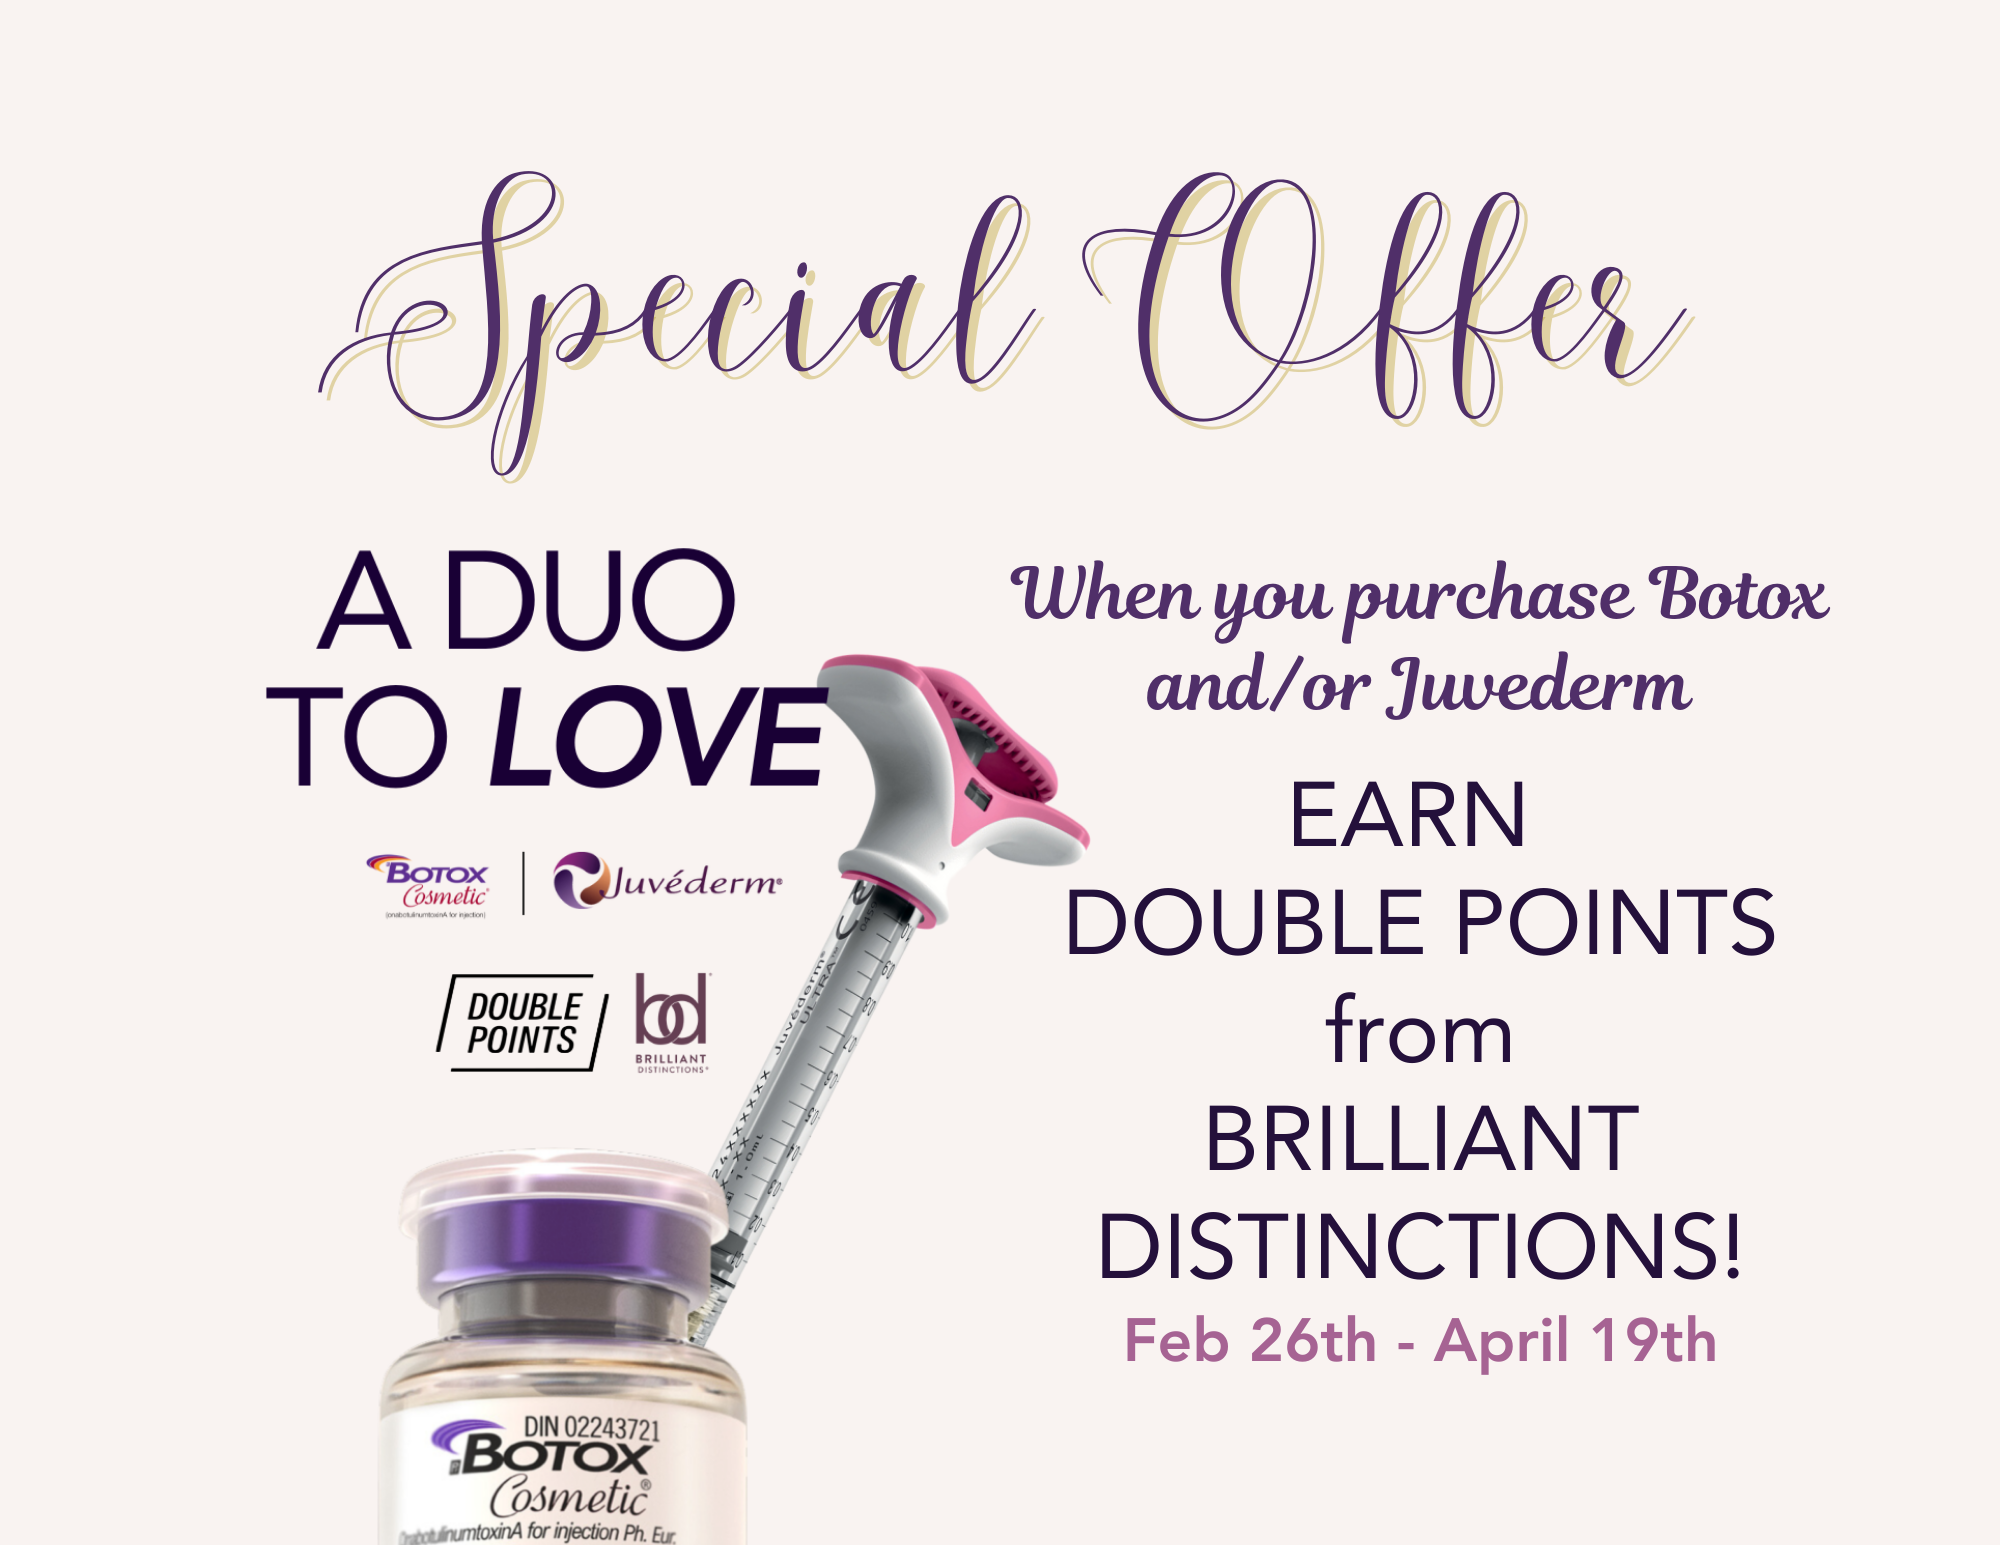 From February 26 to April 19, earn double points from Brilliant Distinctions when you purchase Botox and/or Juvederm